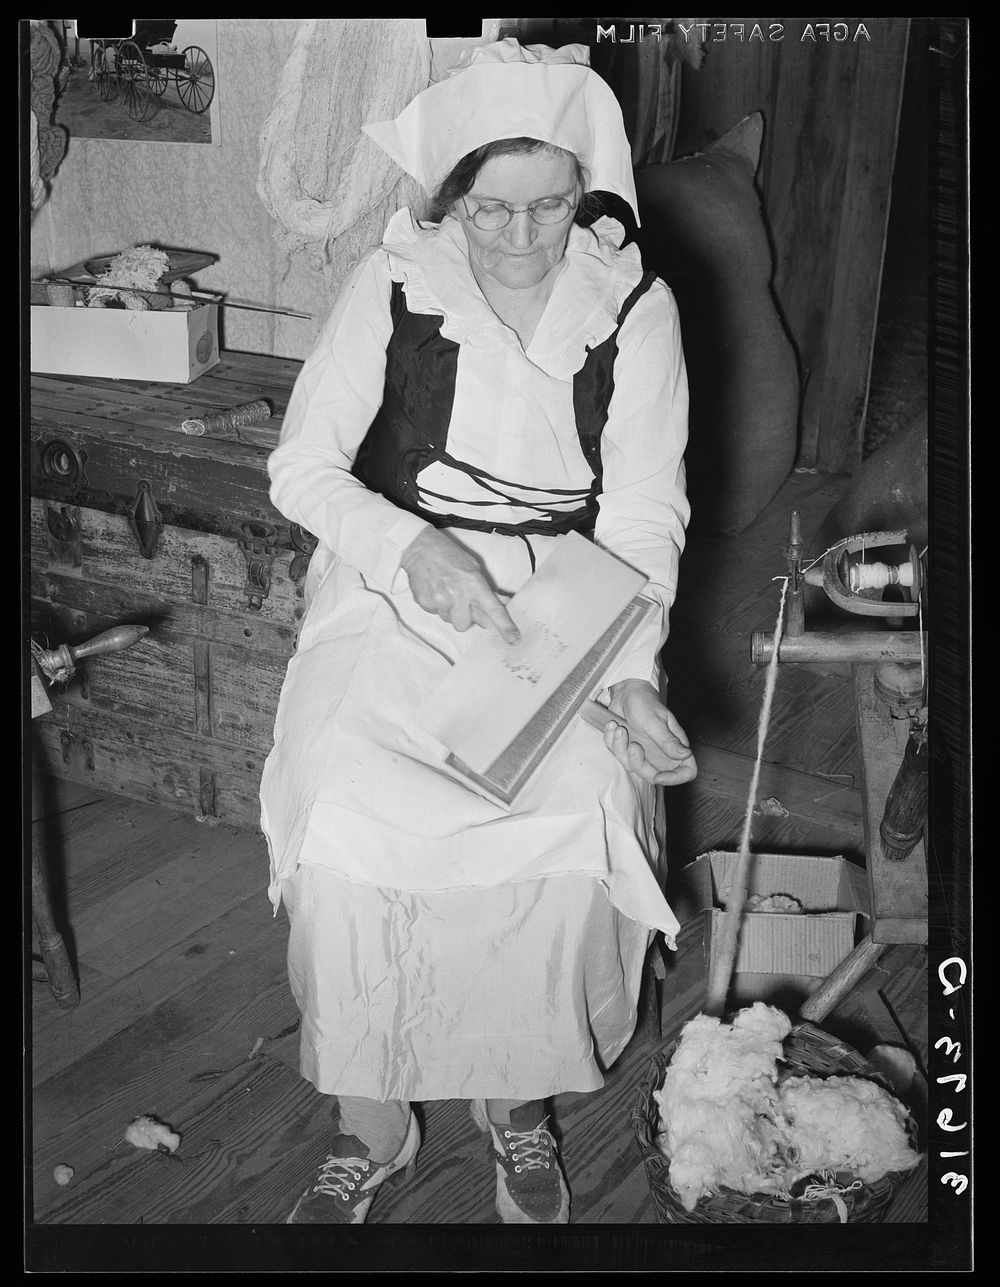 Madame Dronet carding cotton. Erath, Louisiana by Russell Lee